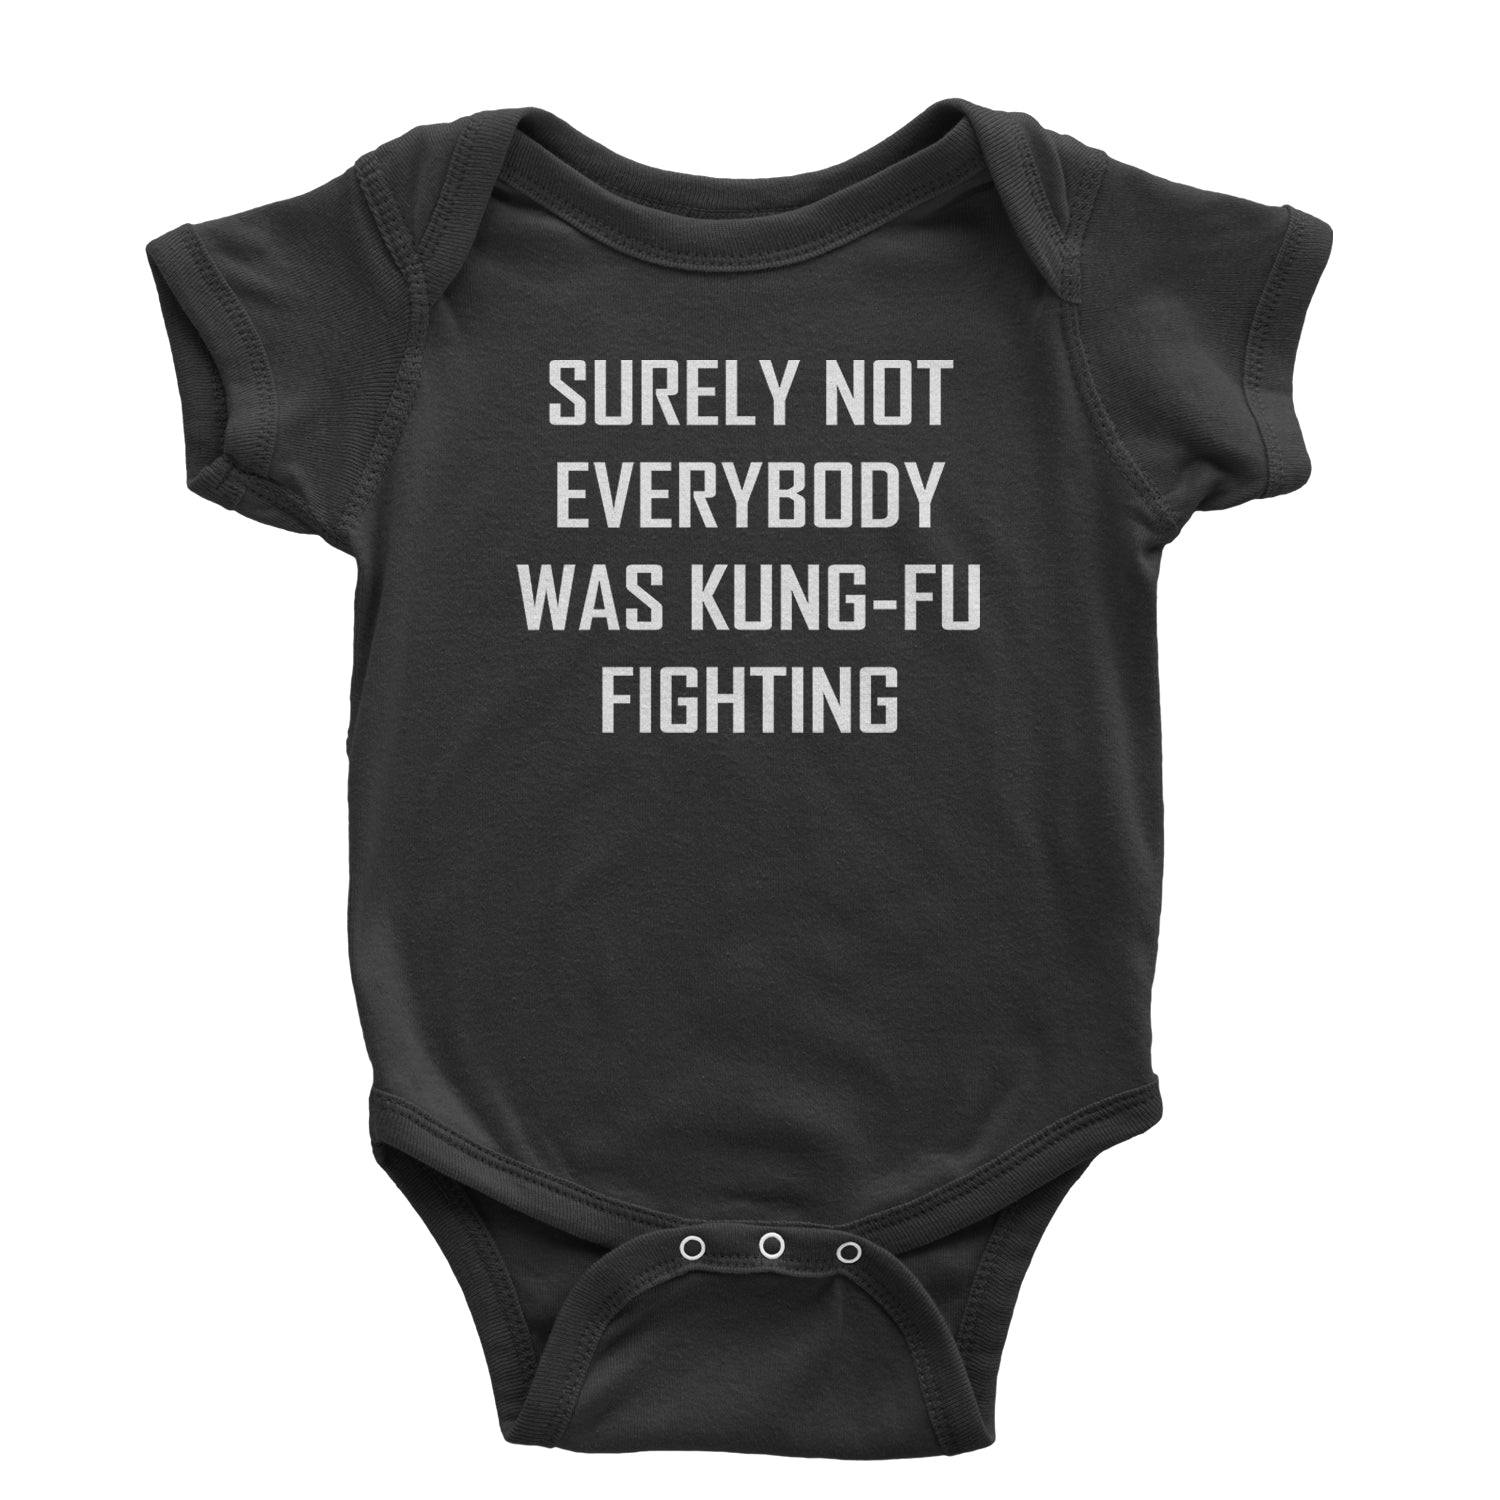 Surely Not Everybody Was Kung-Fu Fighting  Infant One-Piece Romper Bodysuit and Toddler T-shirt